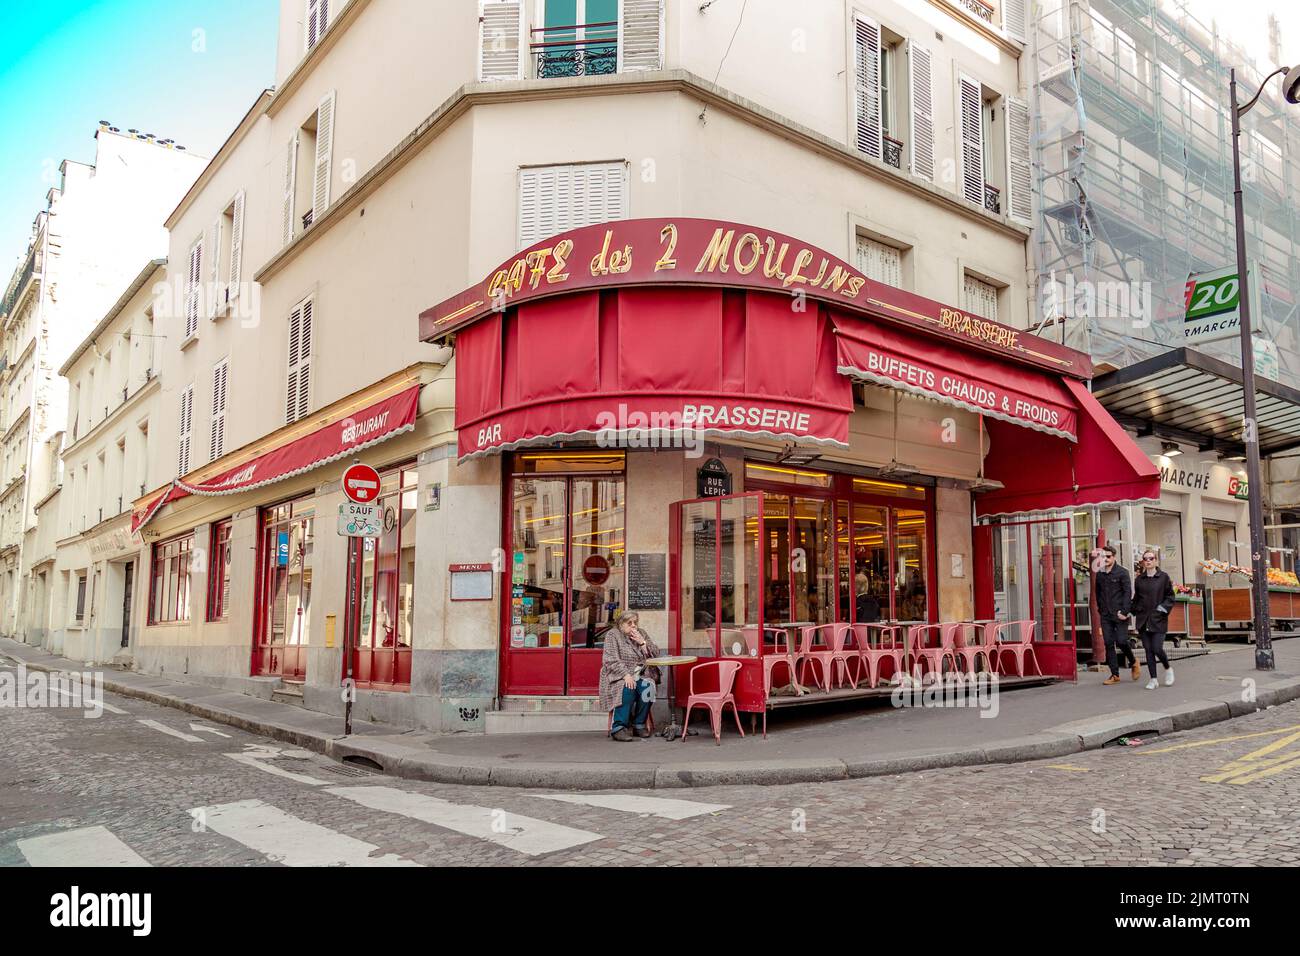 Paris, France, March 26, 2017: The Cafe des 2 Moulins French for Two Windmills is a cafe in the Montmartre Stock Photo